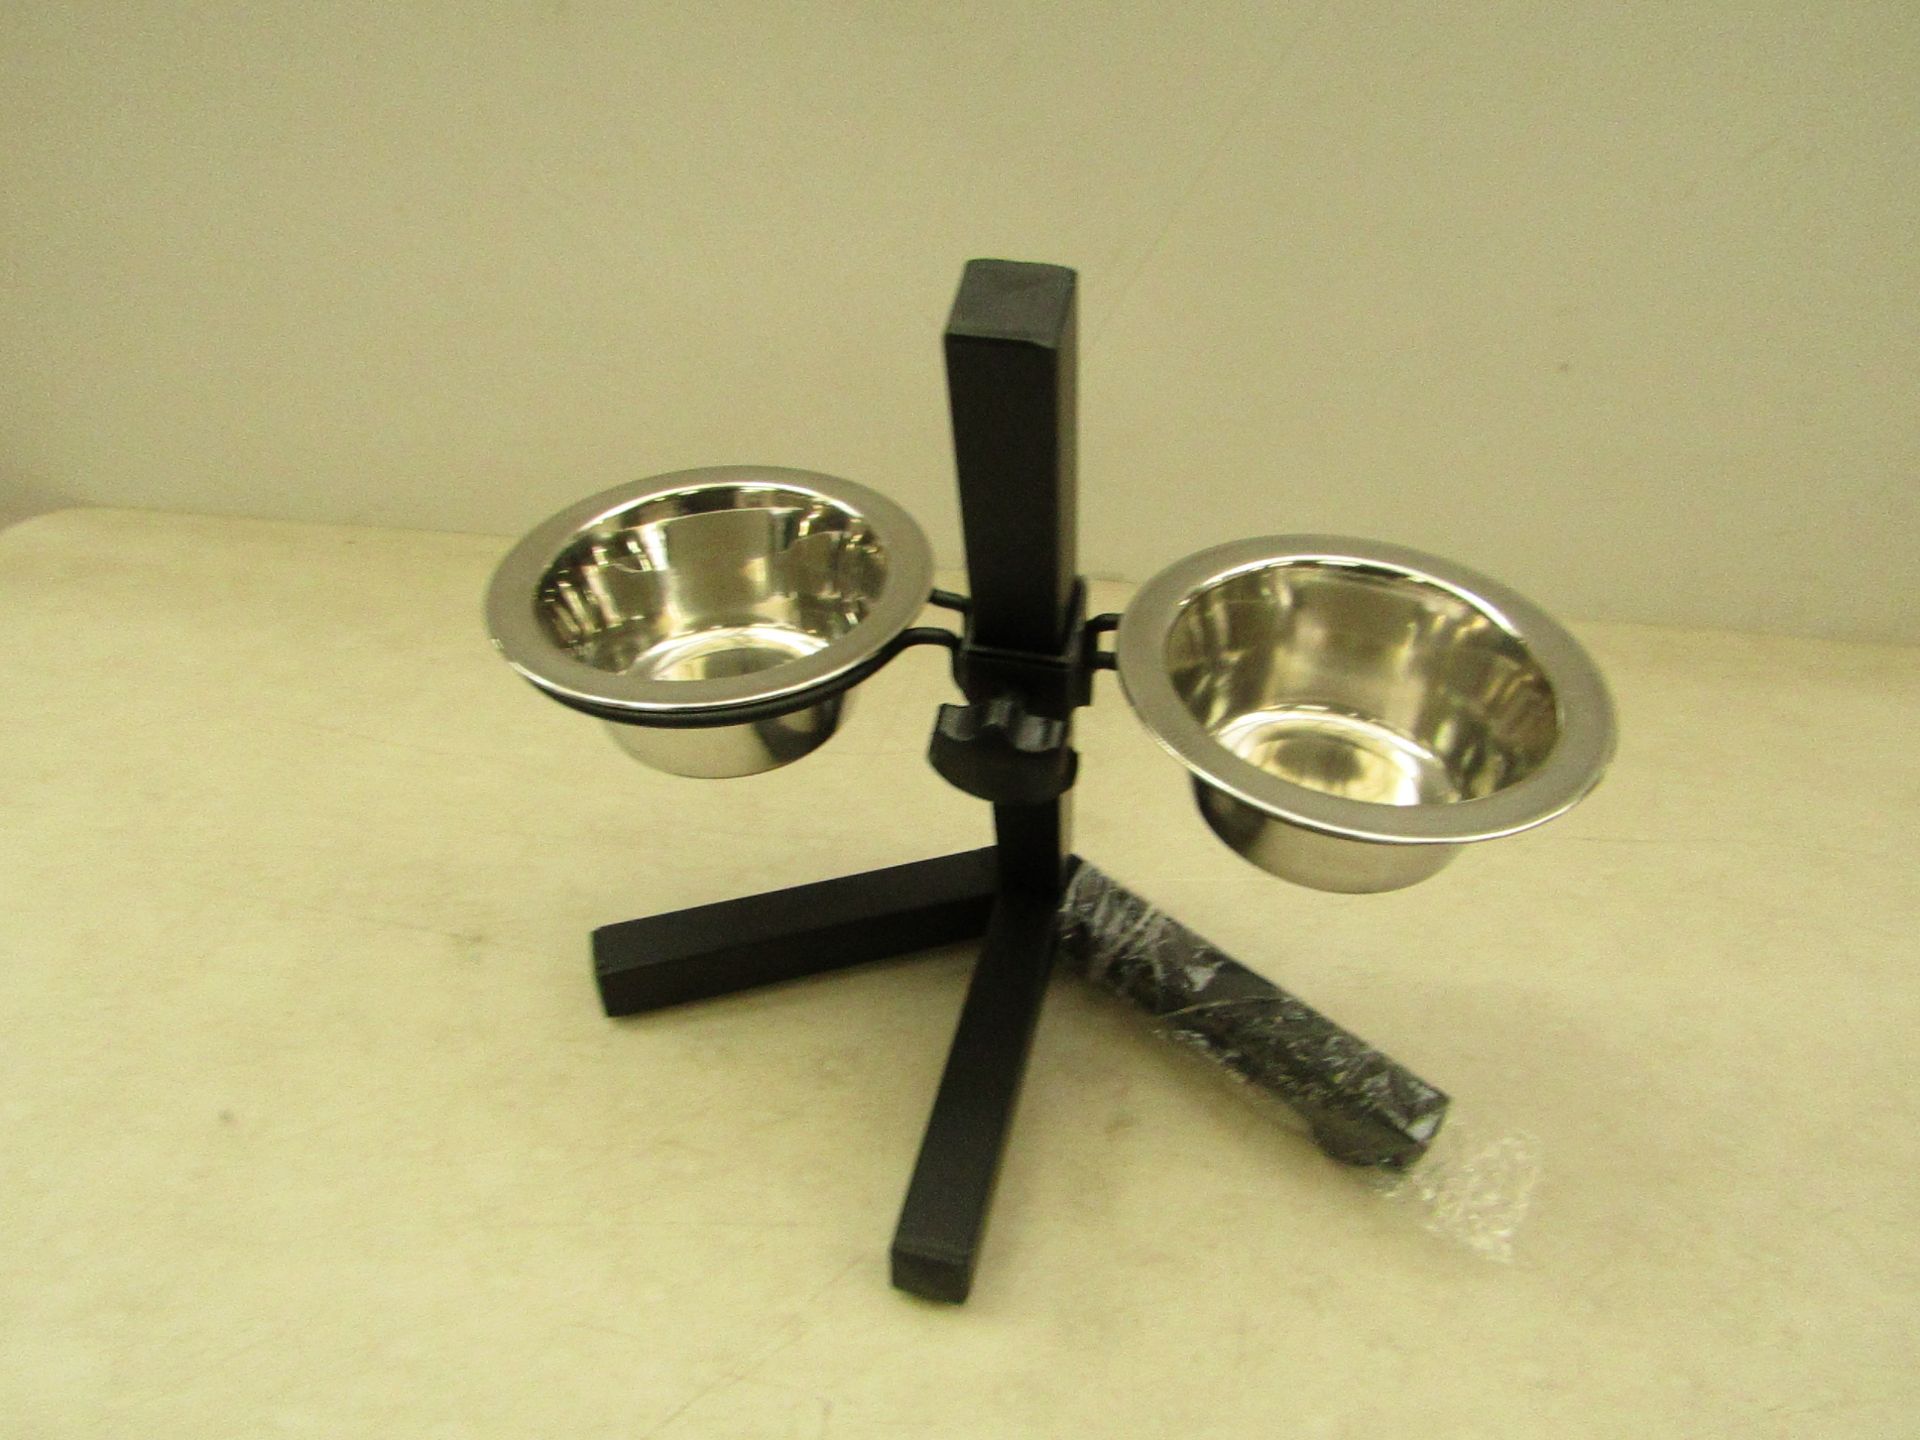 Pet water and food bowl on 1 stand, comes with box